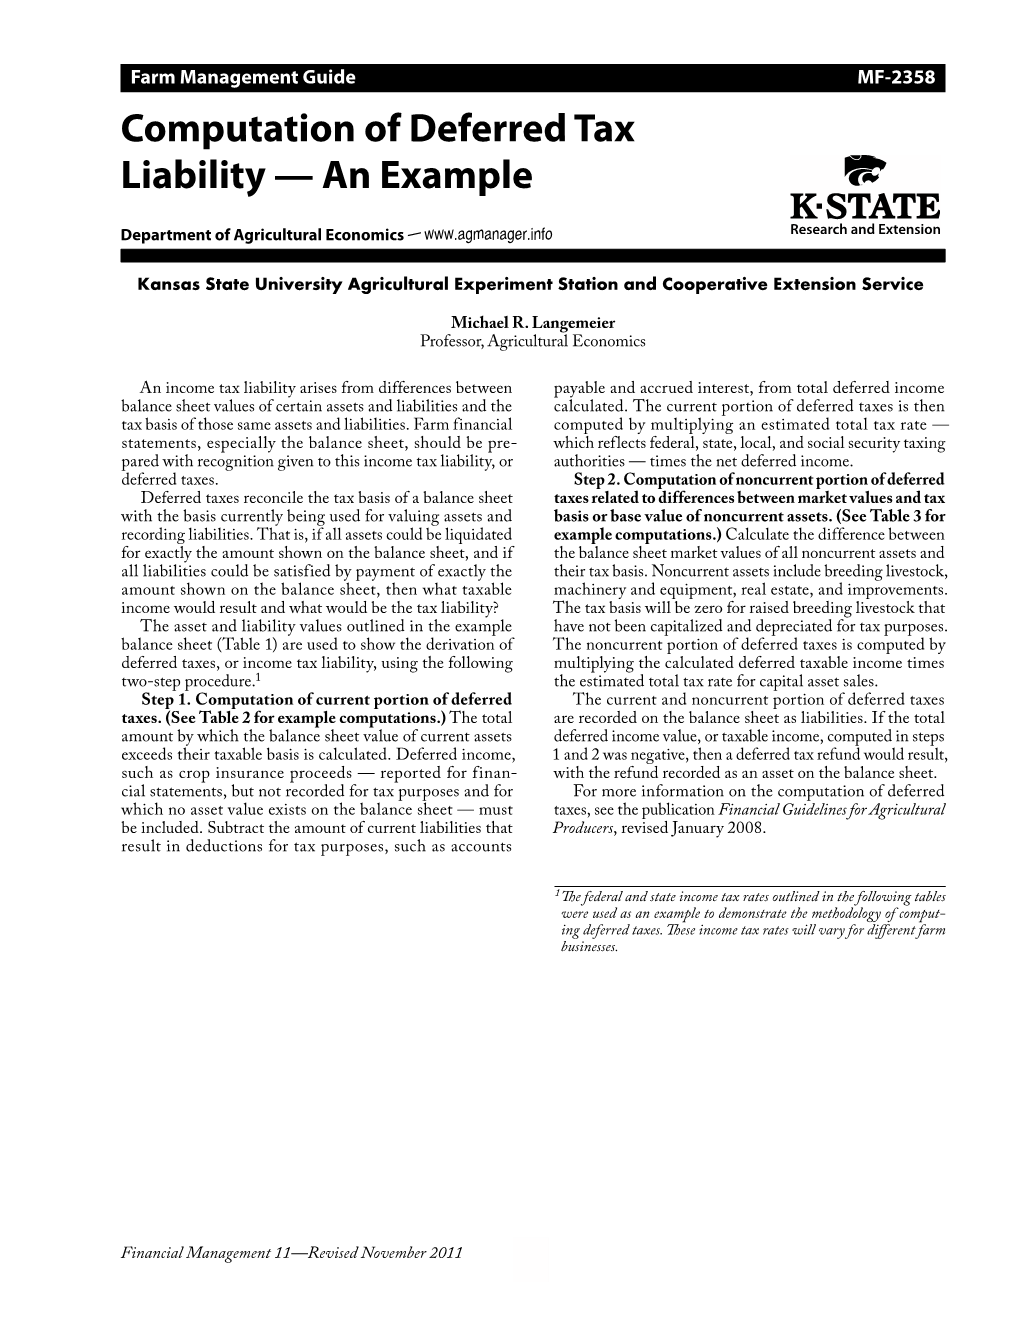 Computation of Deferred Tax Liability — an Example